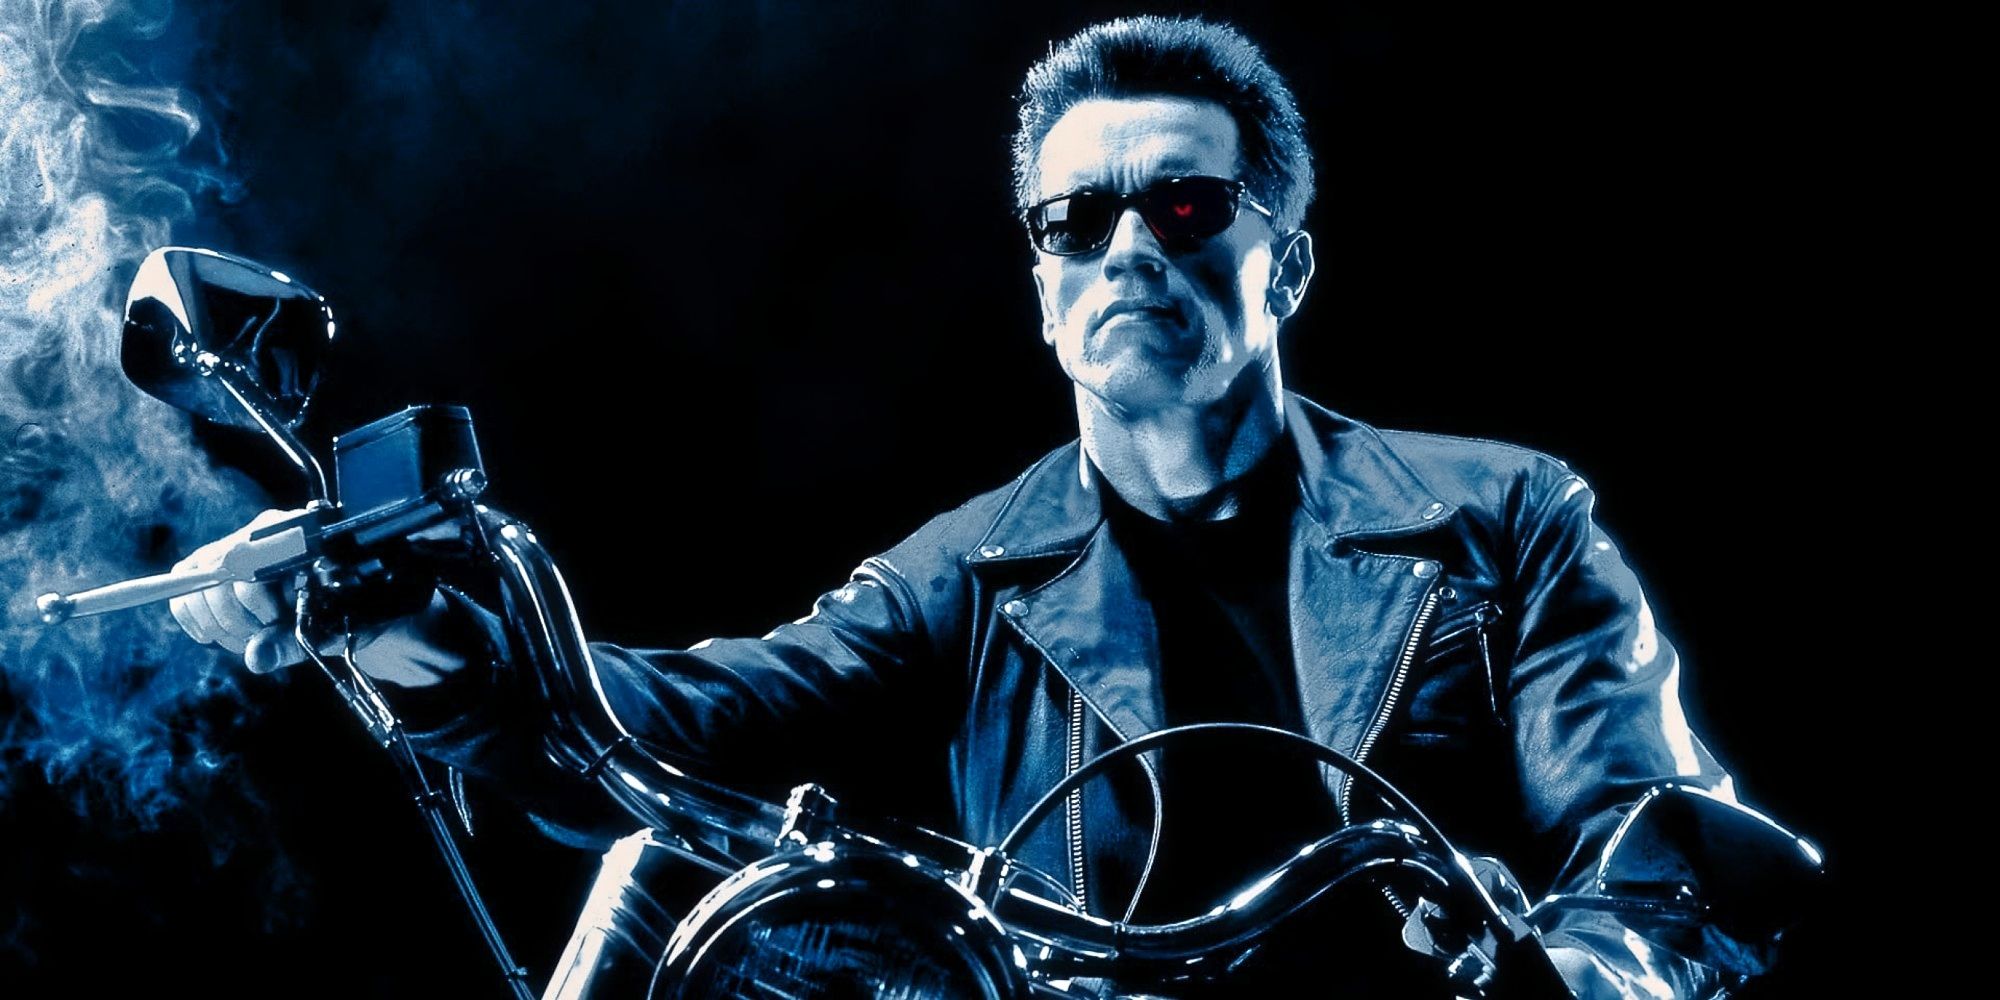 Arnold Schwarzenegger as the T-800 on a motorcycle in terminator 2